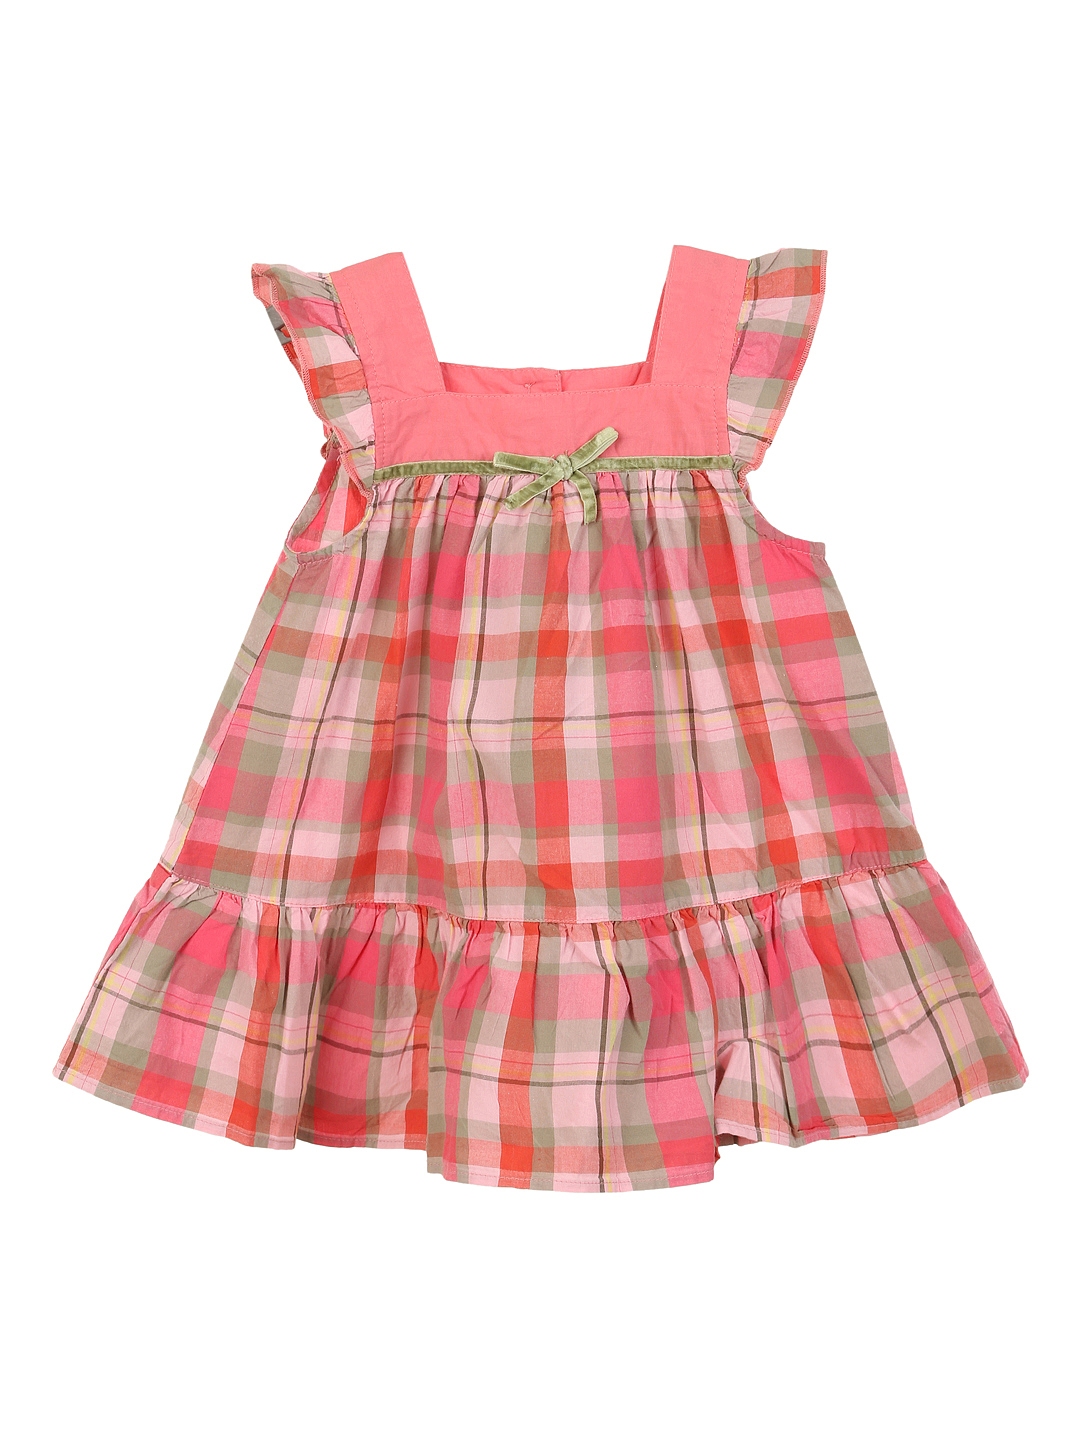 Buy Lilliput Girls Pink Checked A Line Dress - Dresses for Girls ...